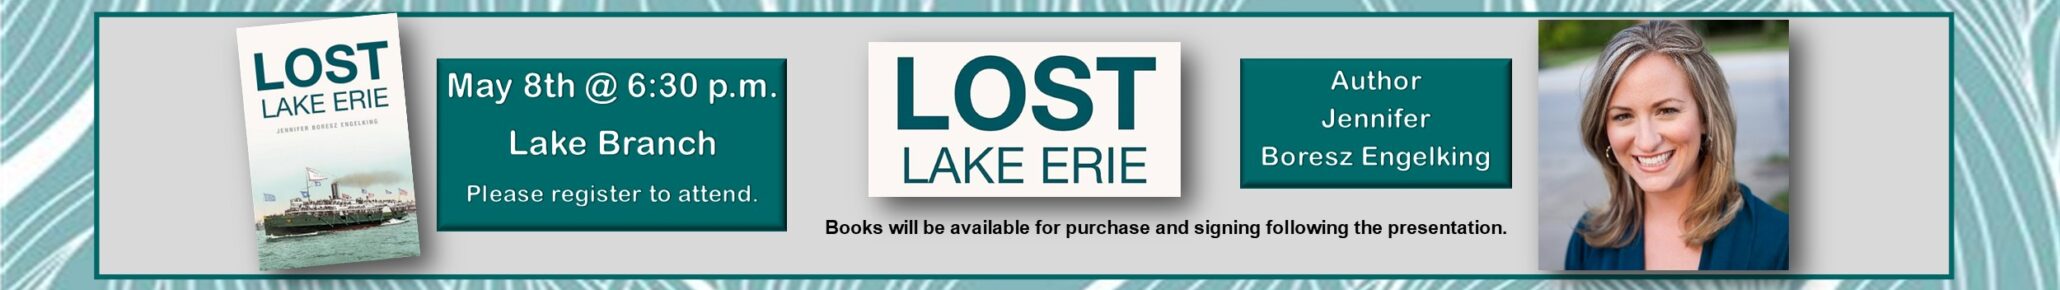 lost lake erie at the lake branch on may 8